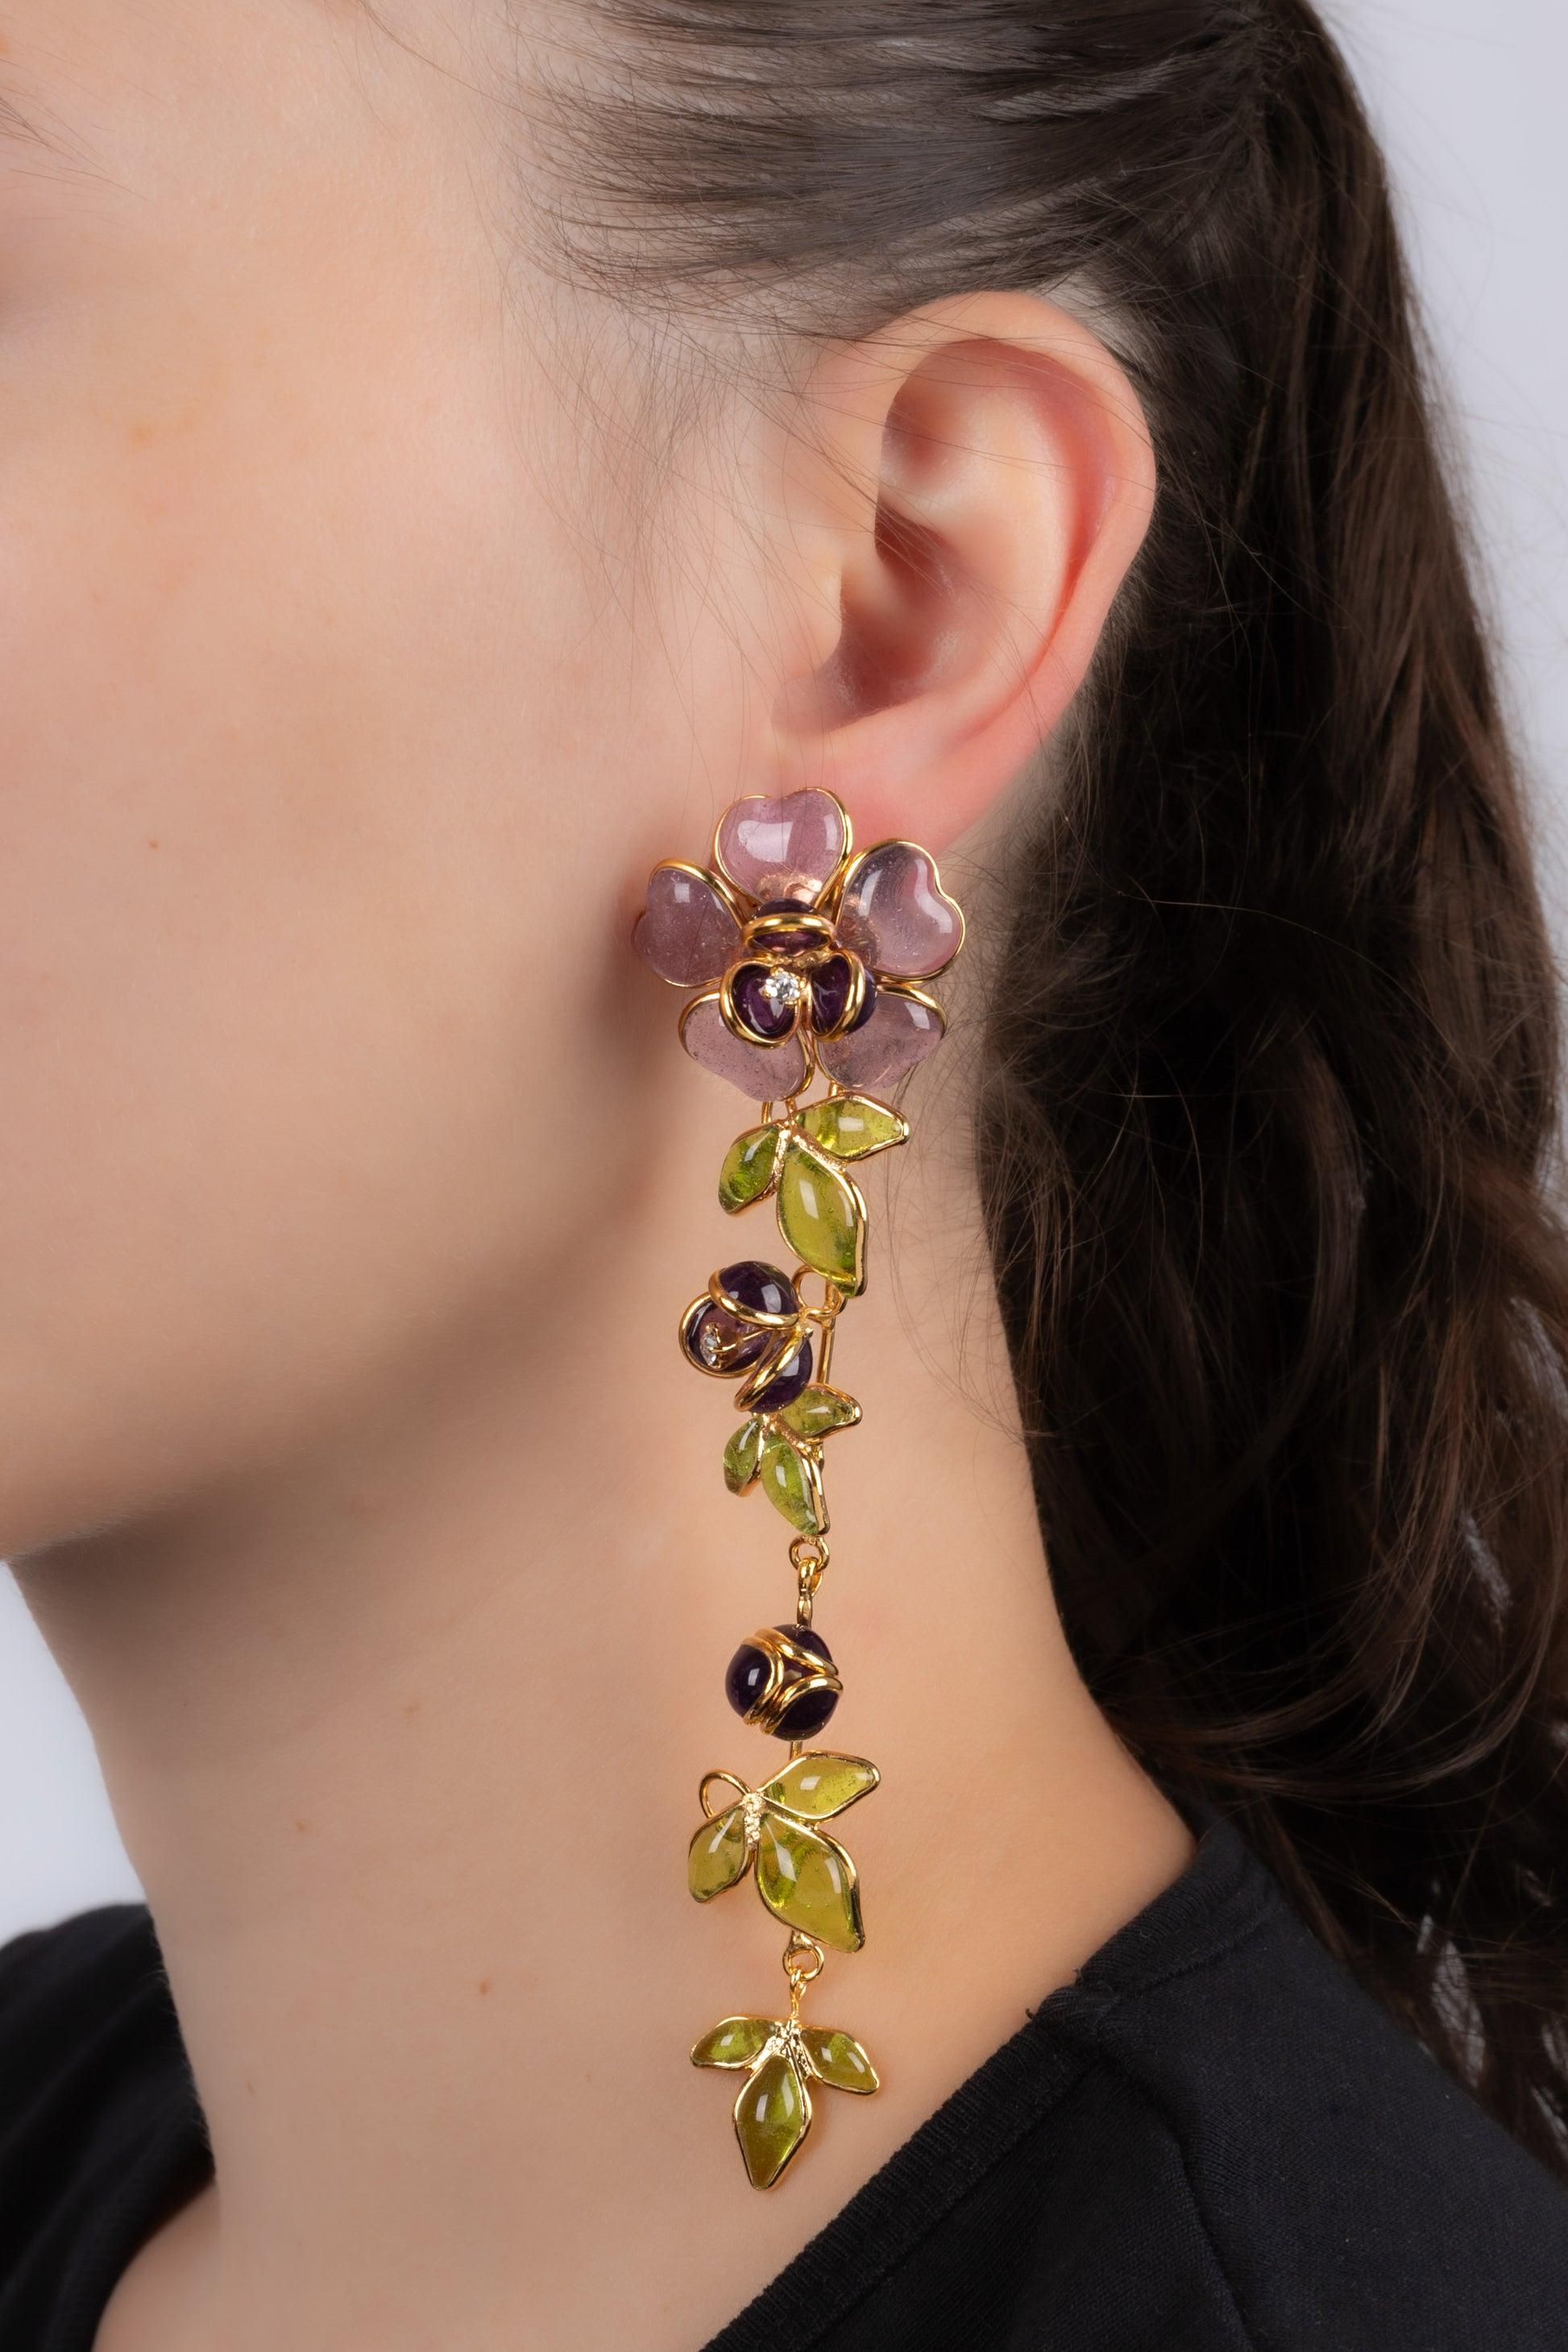 Augustine - Golden metal earrings with glass paste in purple tones.

Additional information:
Condition: Very good condition
Dimensions: Length: 12.5 cm

Seller Reference: BO229